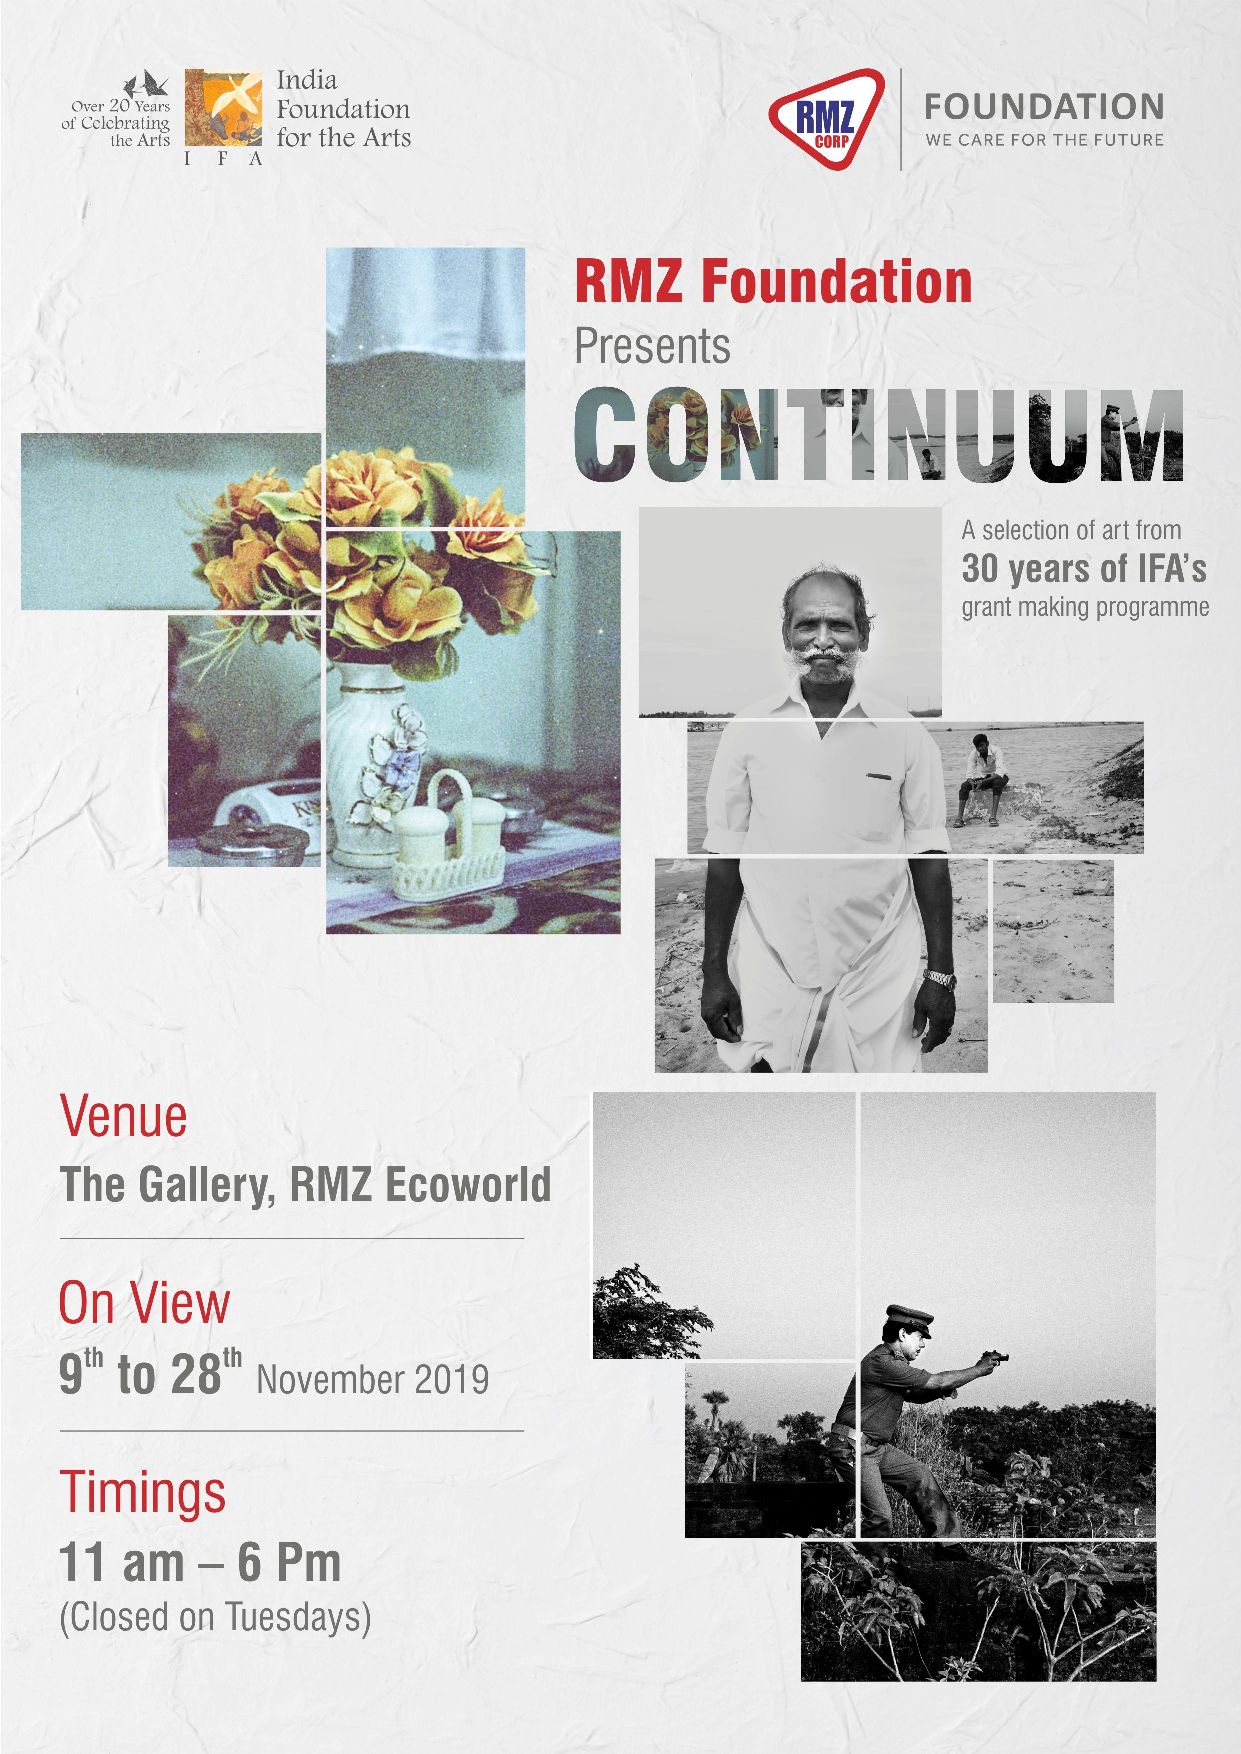 rmz-foundation-in-association-with-india-foundation-for-the-arts-ifa-presents-continuum